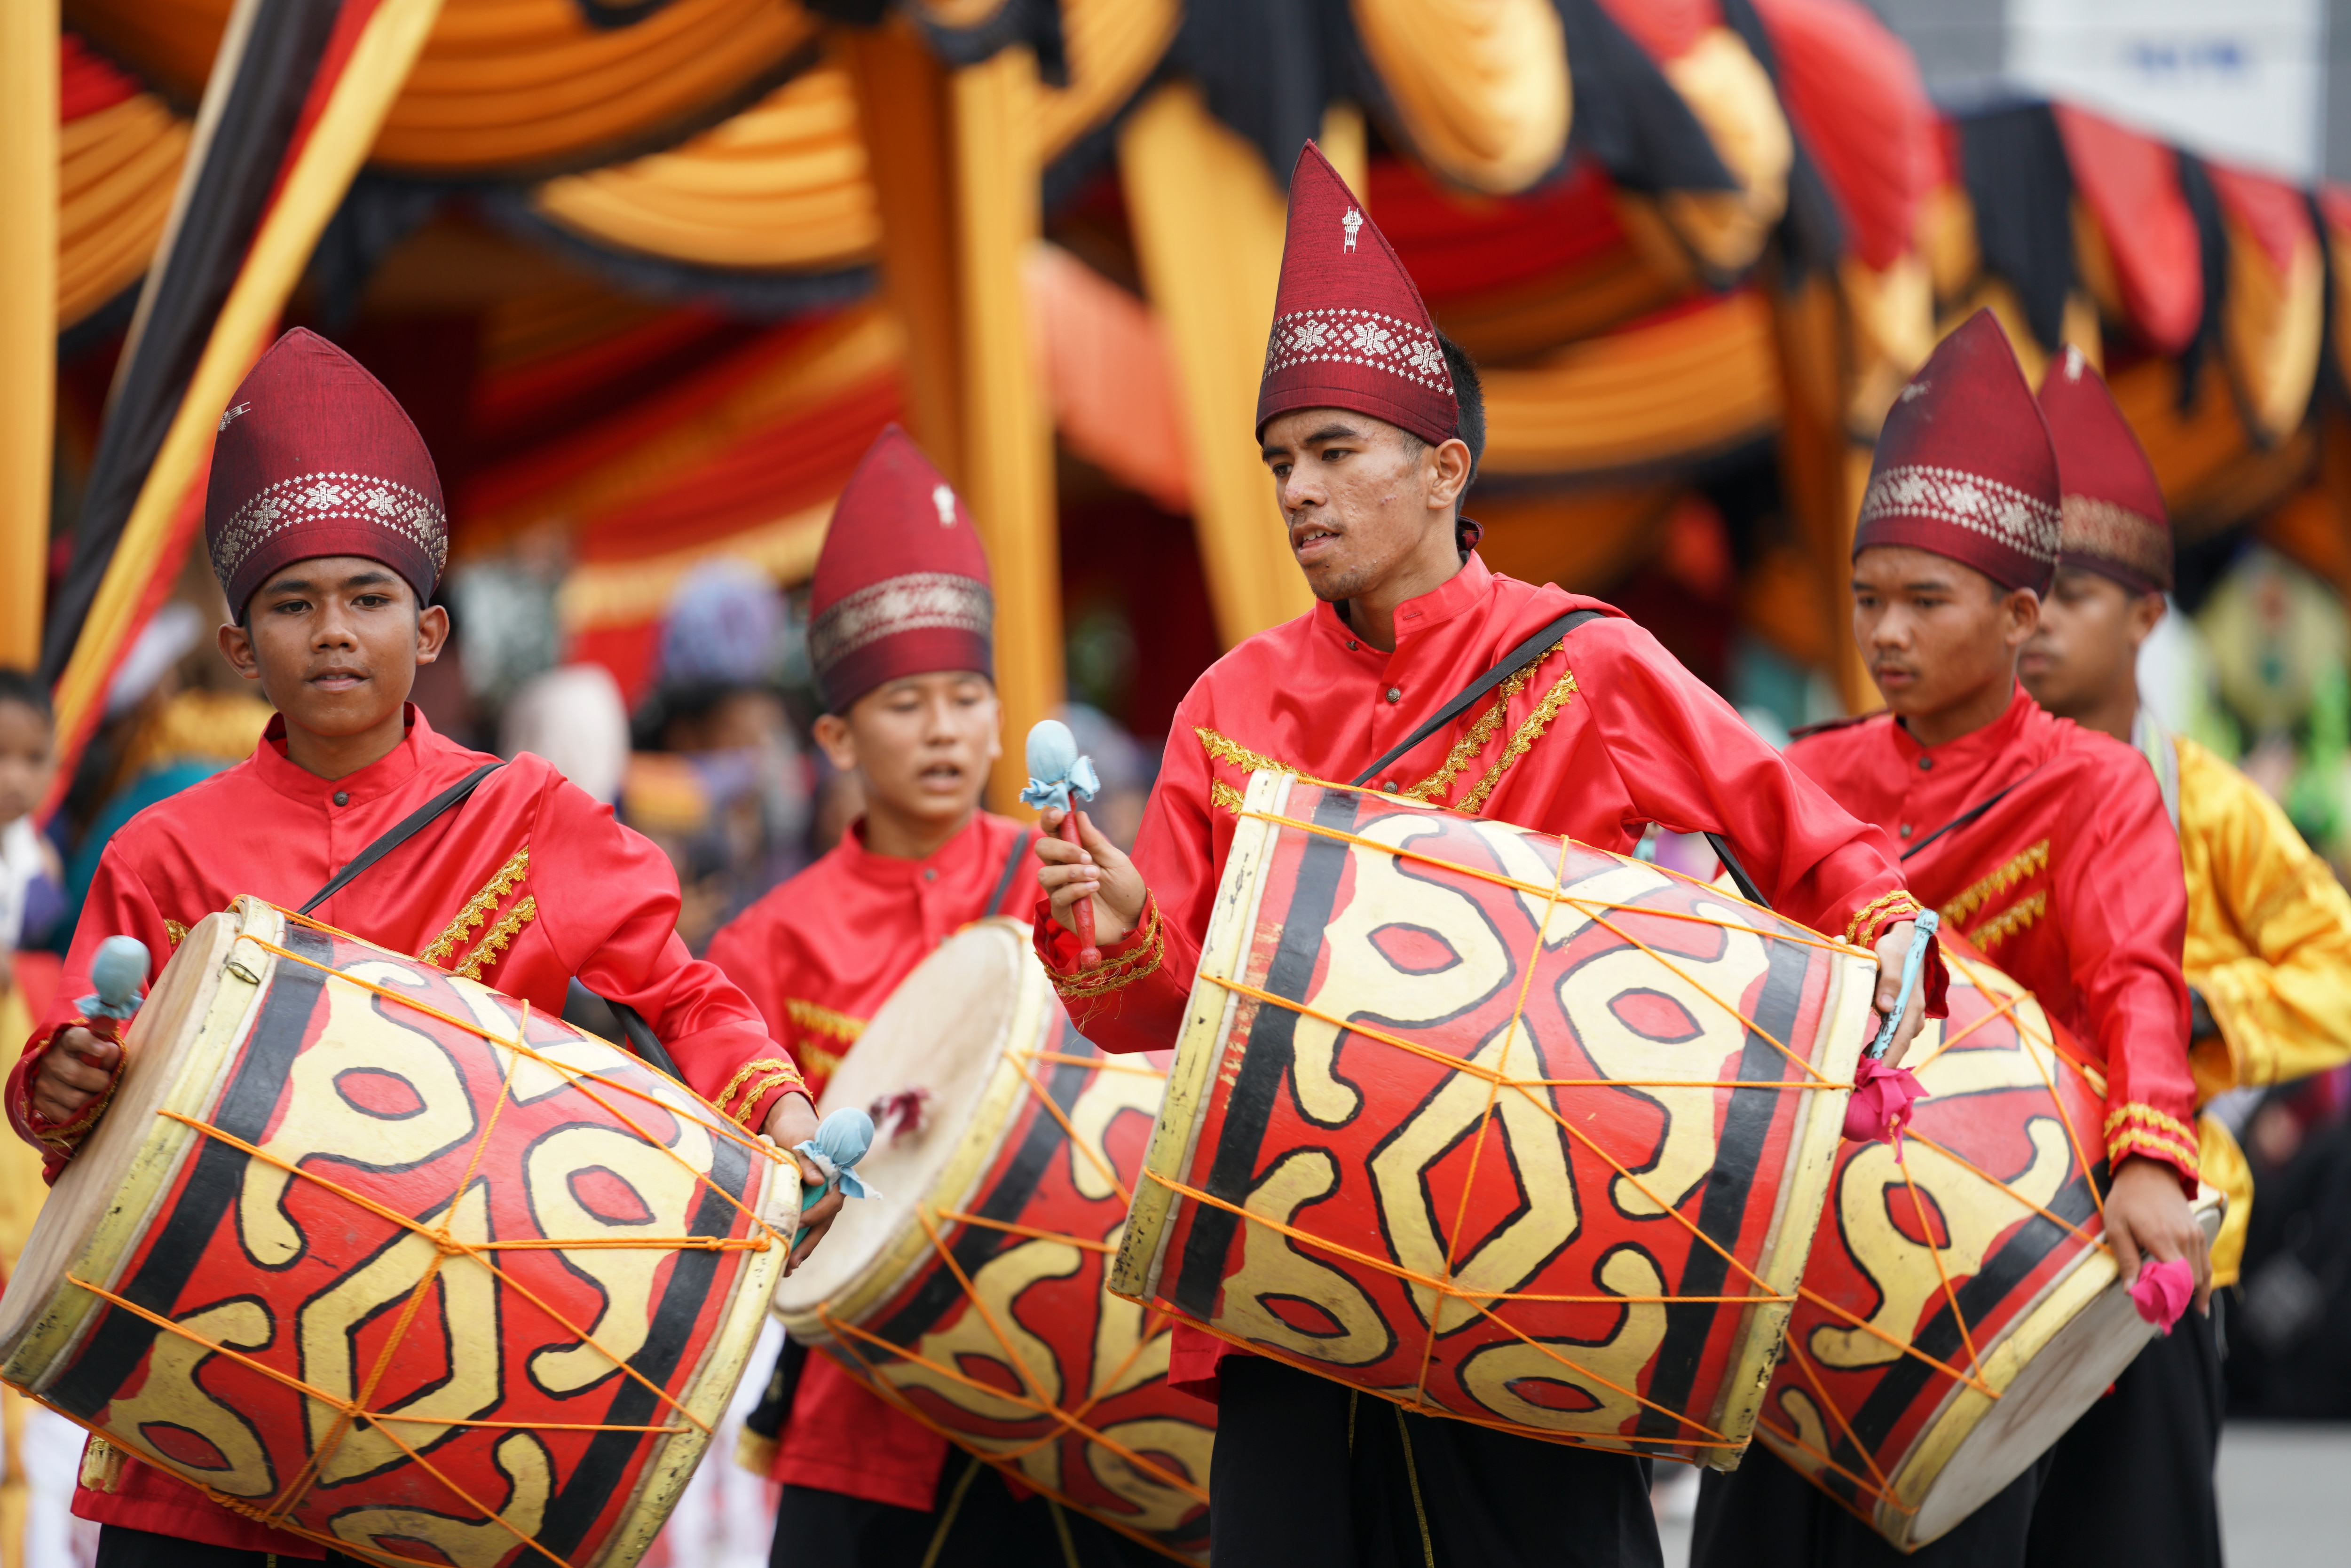 Local identity is important to these Minangkabau youths.